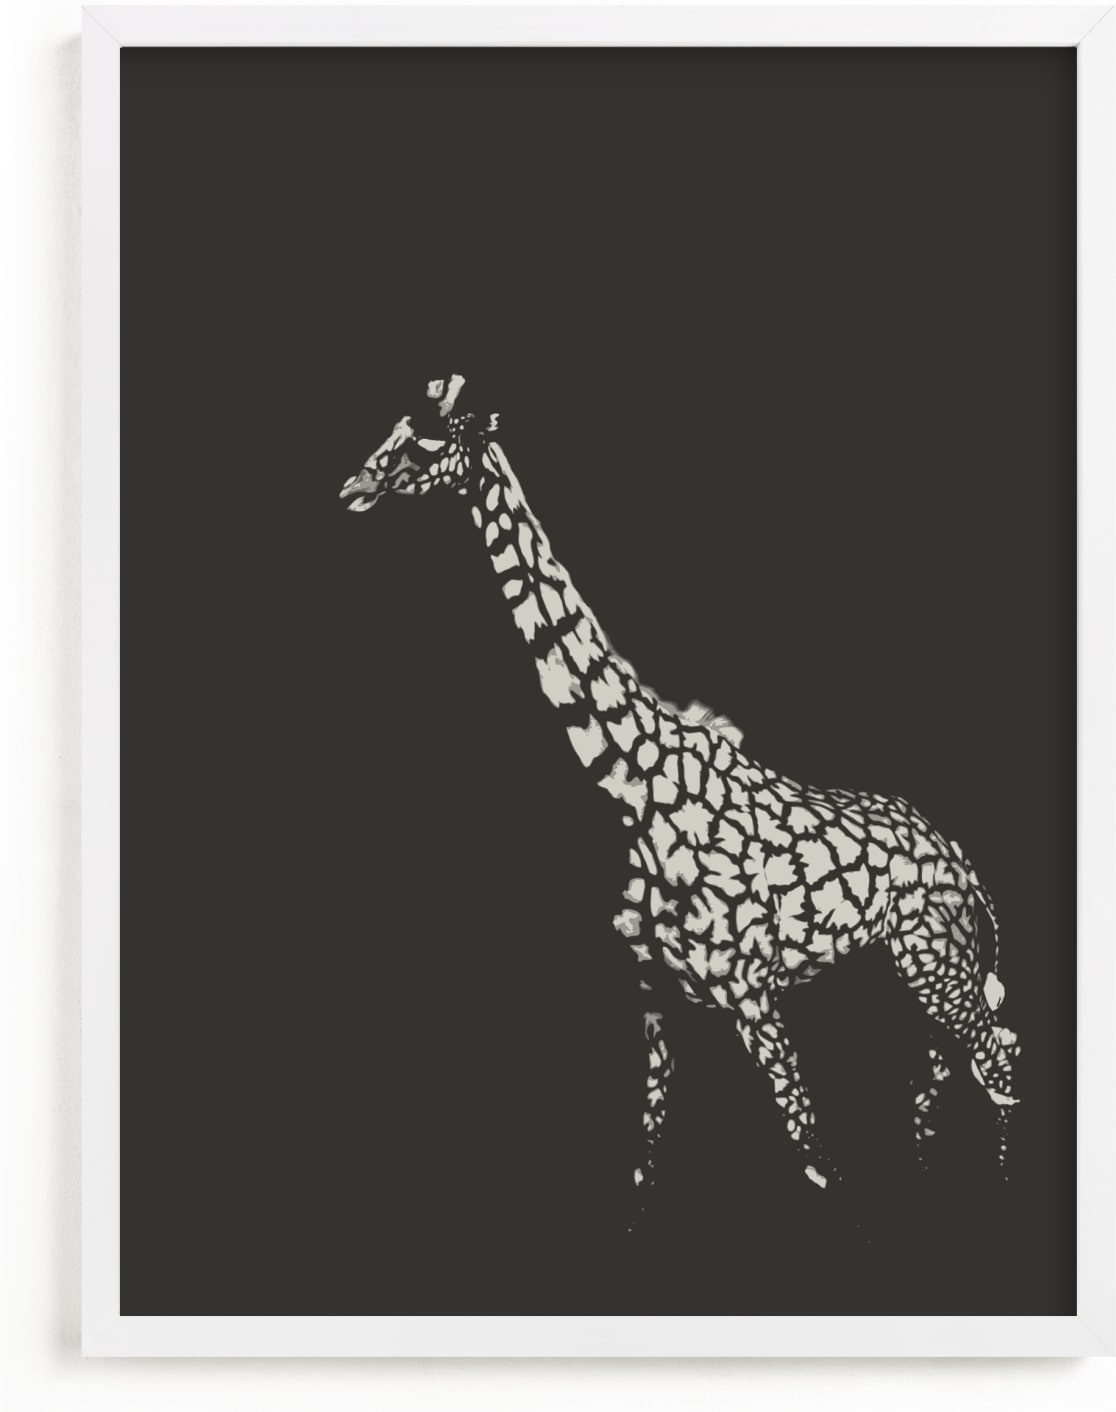 This is a black and white art by Erin Niehenke called fading giraffe.